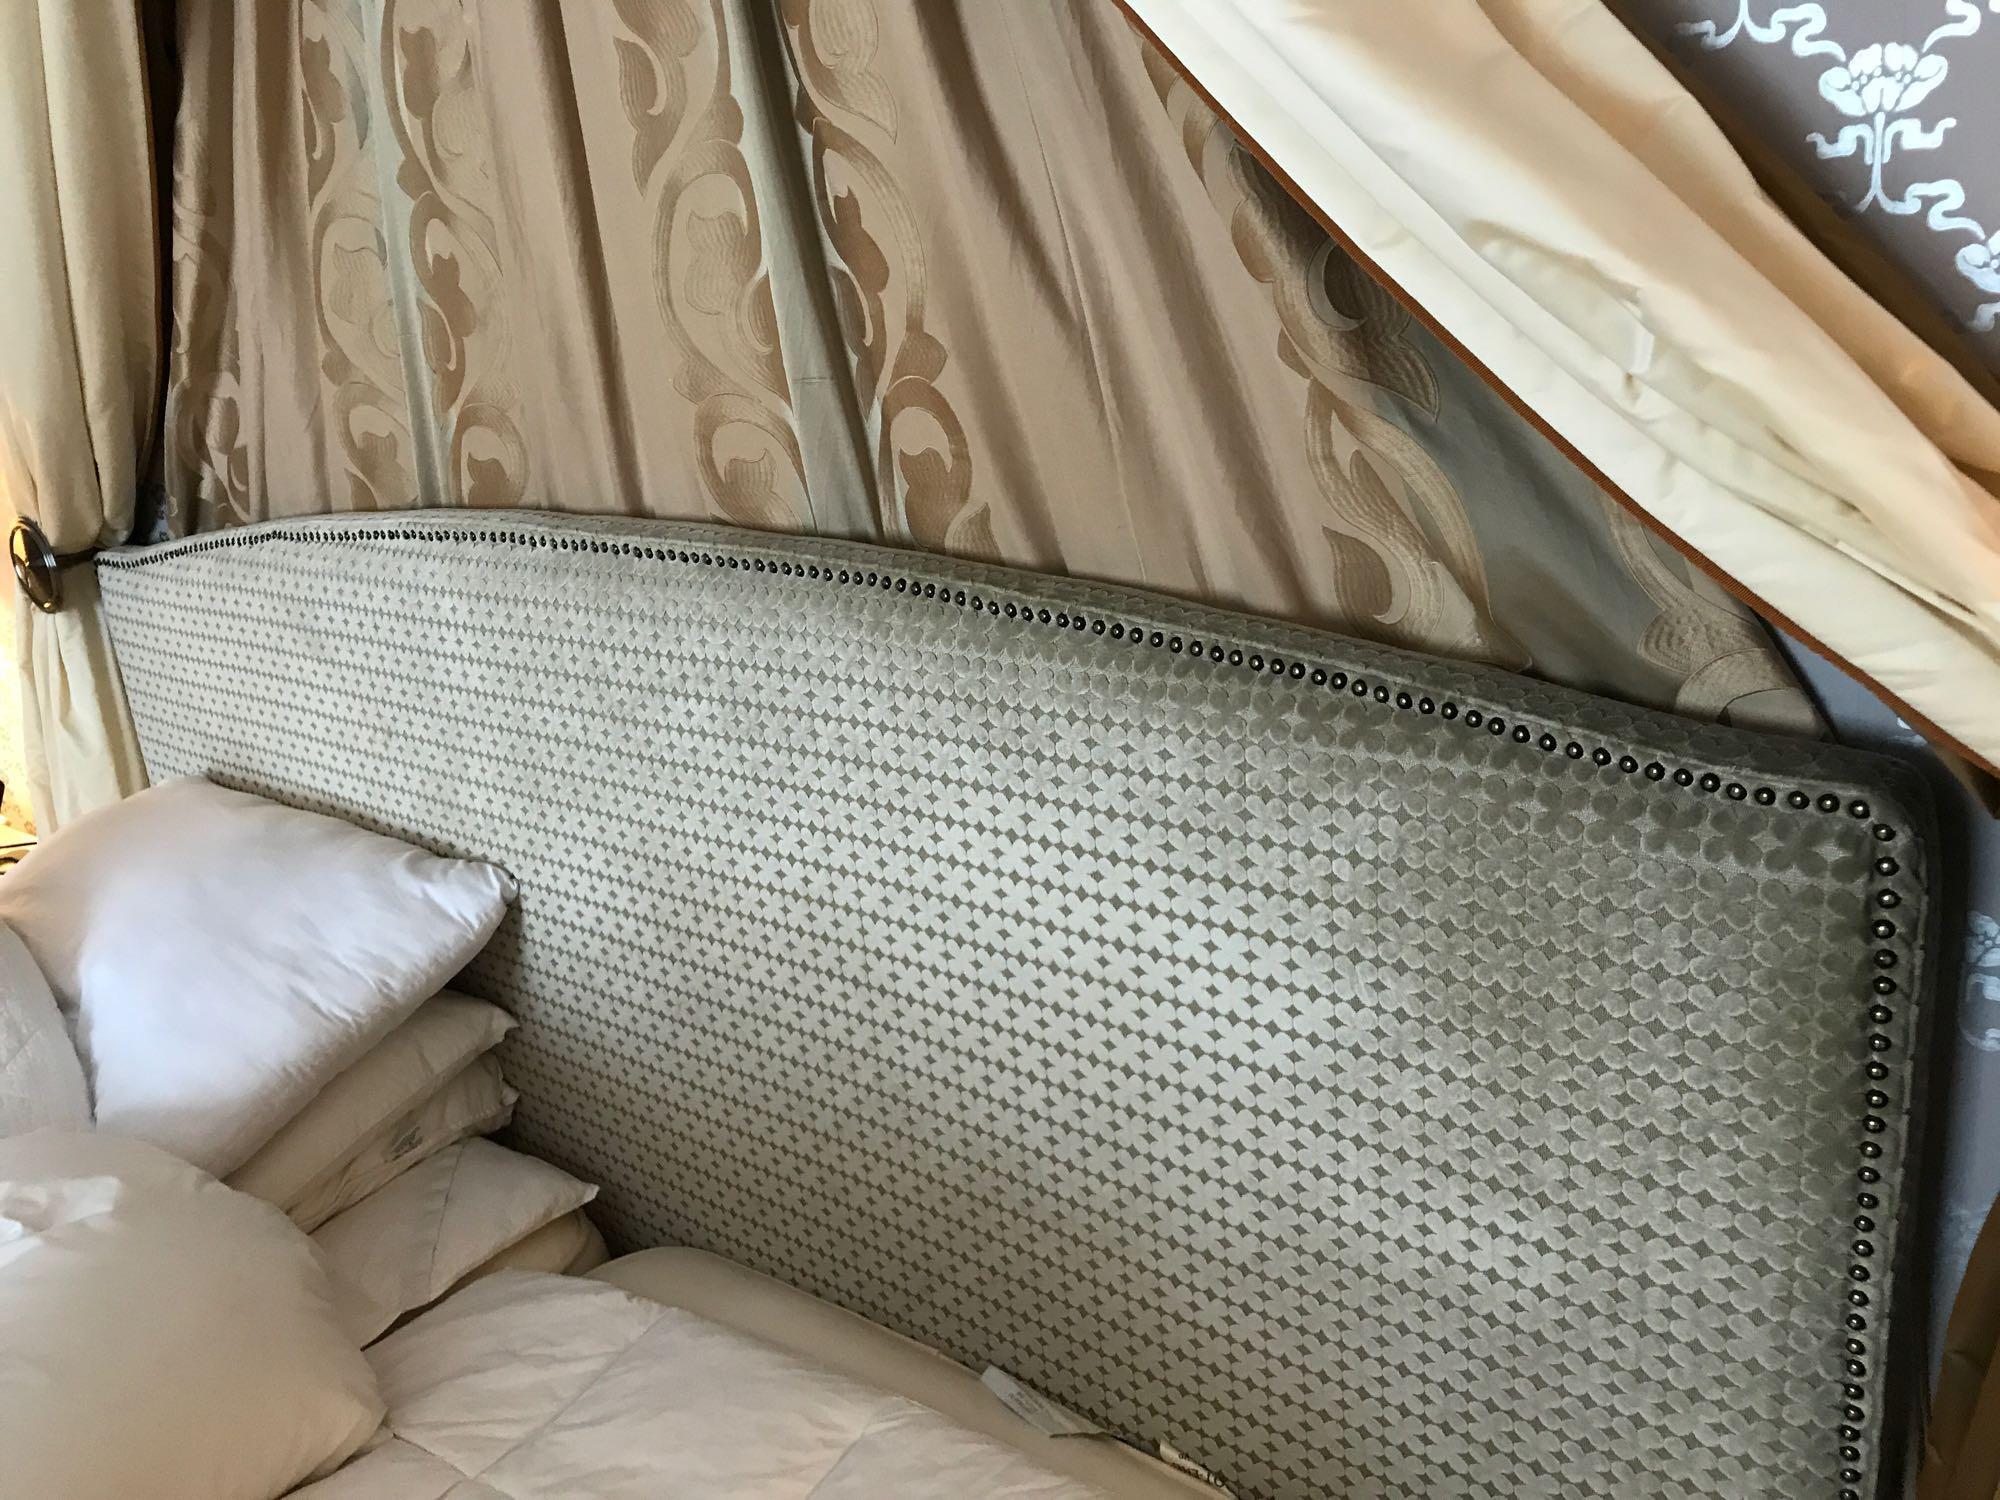 Headboard, Handcrafted With Nail Trim And Padded Textured Woven Upholstery (Room 428) - Image 2 of 2